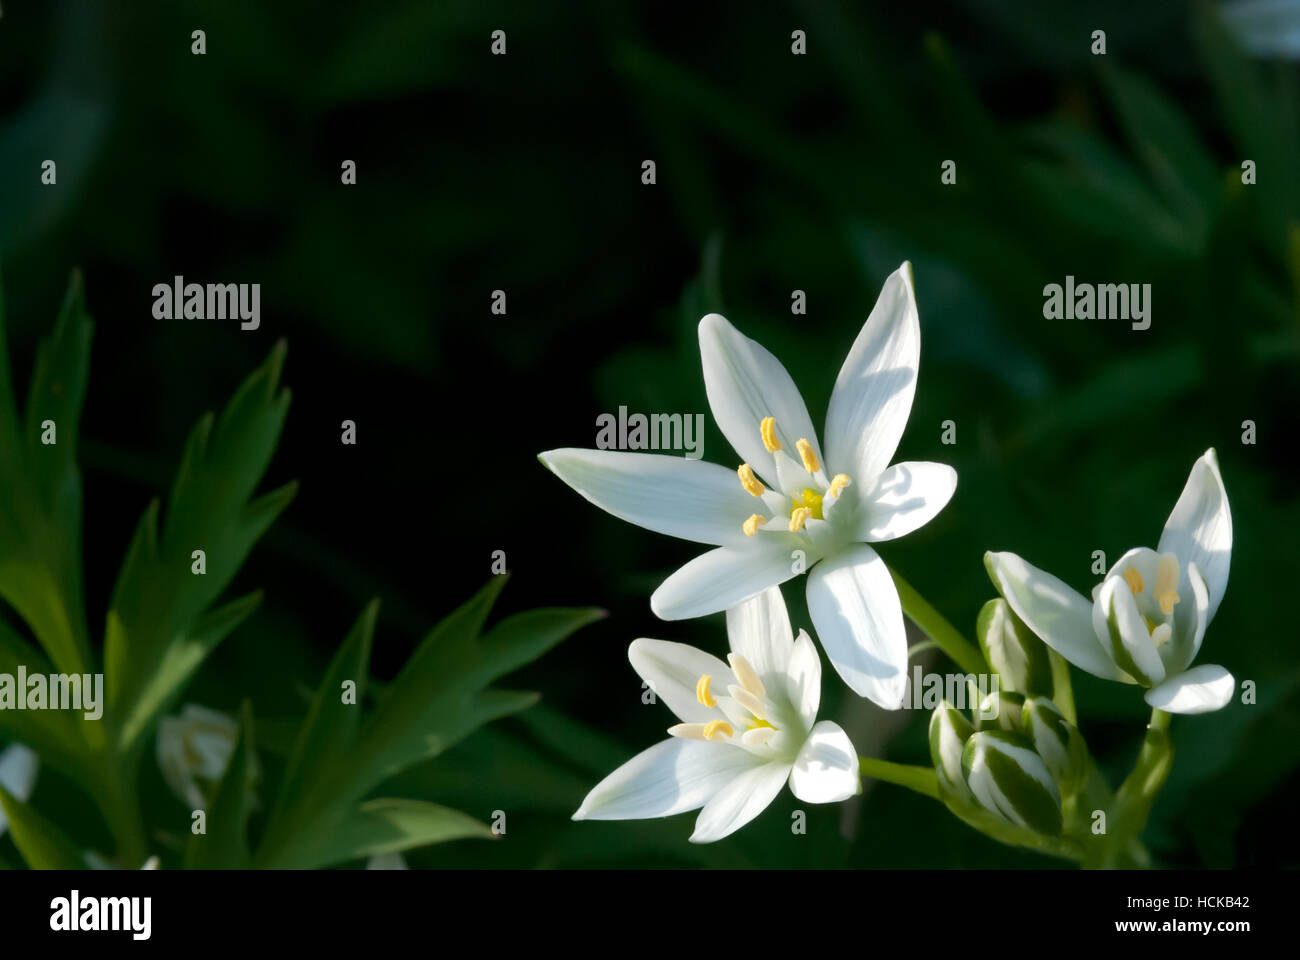 The Ornithogalum umbellatum have many names as Star-of-Bethlehem, Grass Lily, Nap-at-Noon, Eleven-o'clock Lady dark background Stock Photo